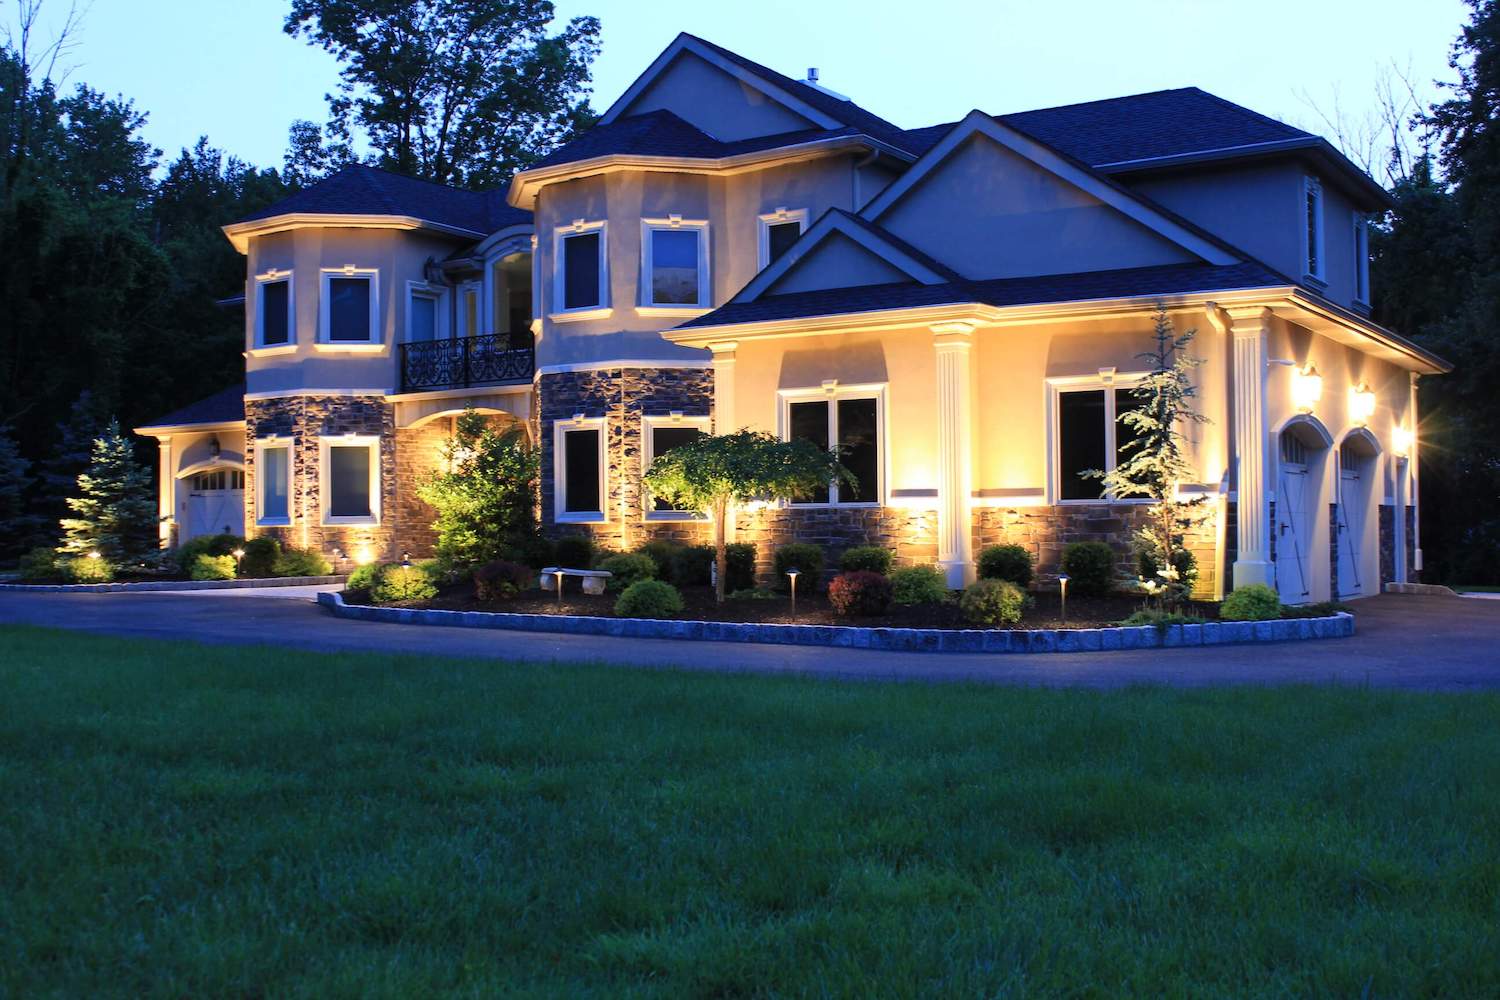 Visions Outdoor Lighting Lights and Landscapes Landscaping New Jersey 2